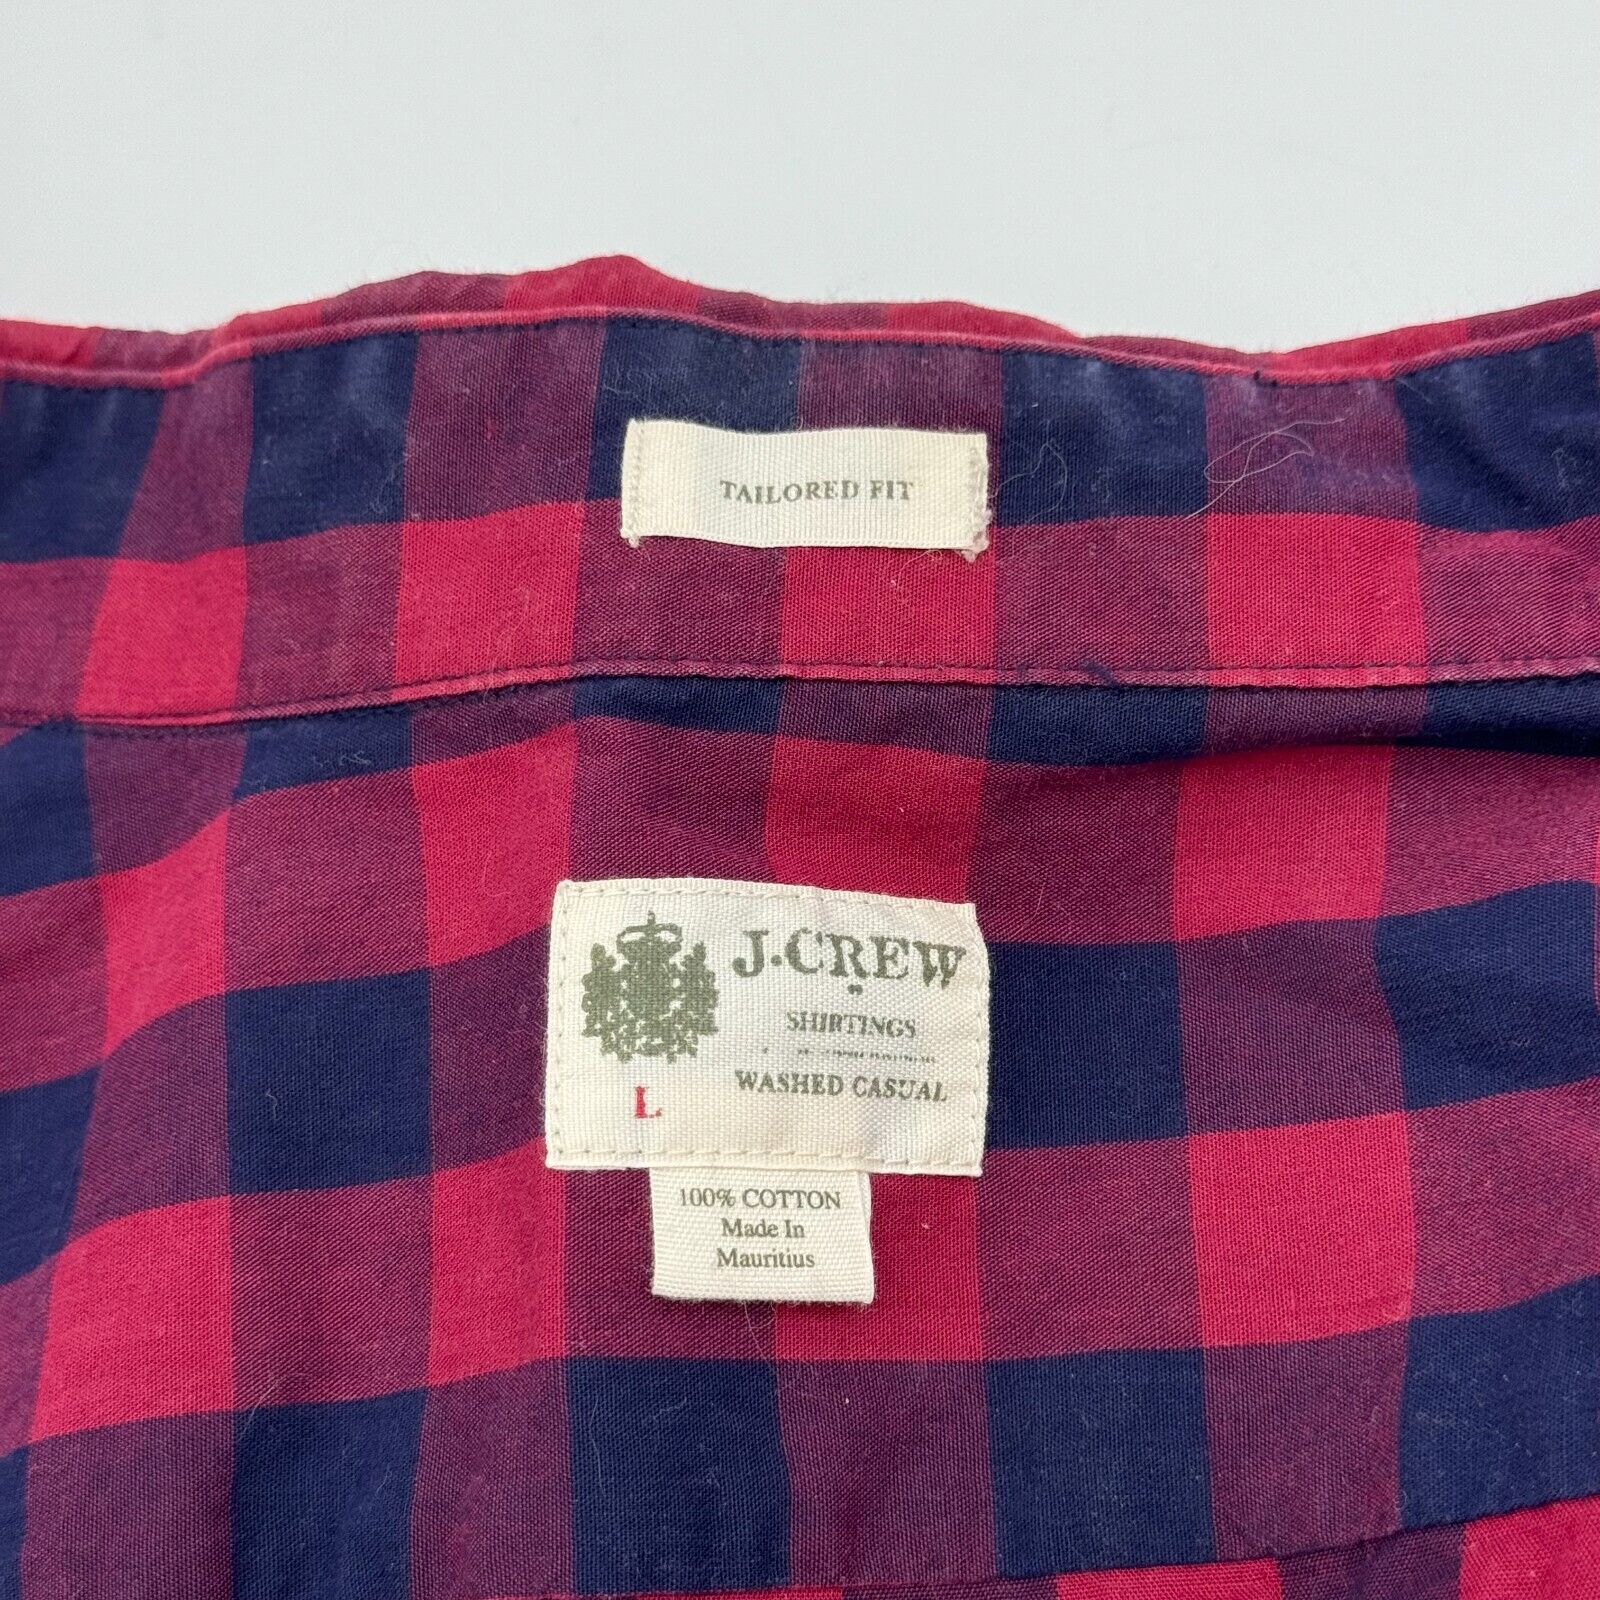 J Crew Shirtings Washed Casual Tailored Fit Red Black Checkered Flannel Mens L